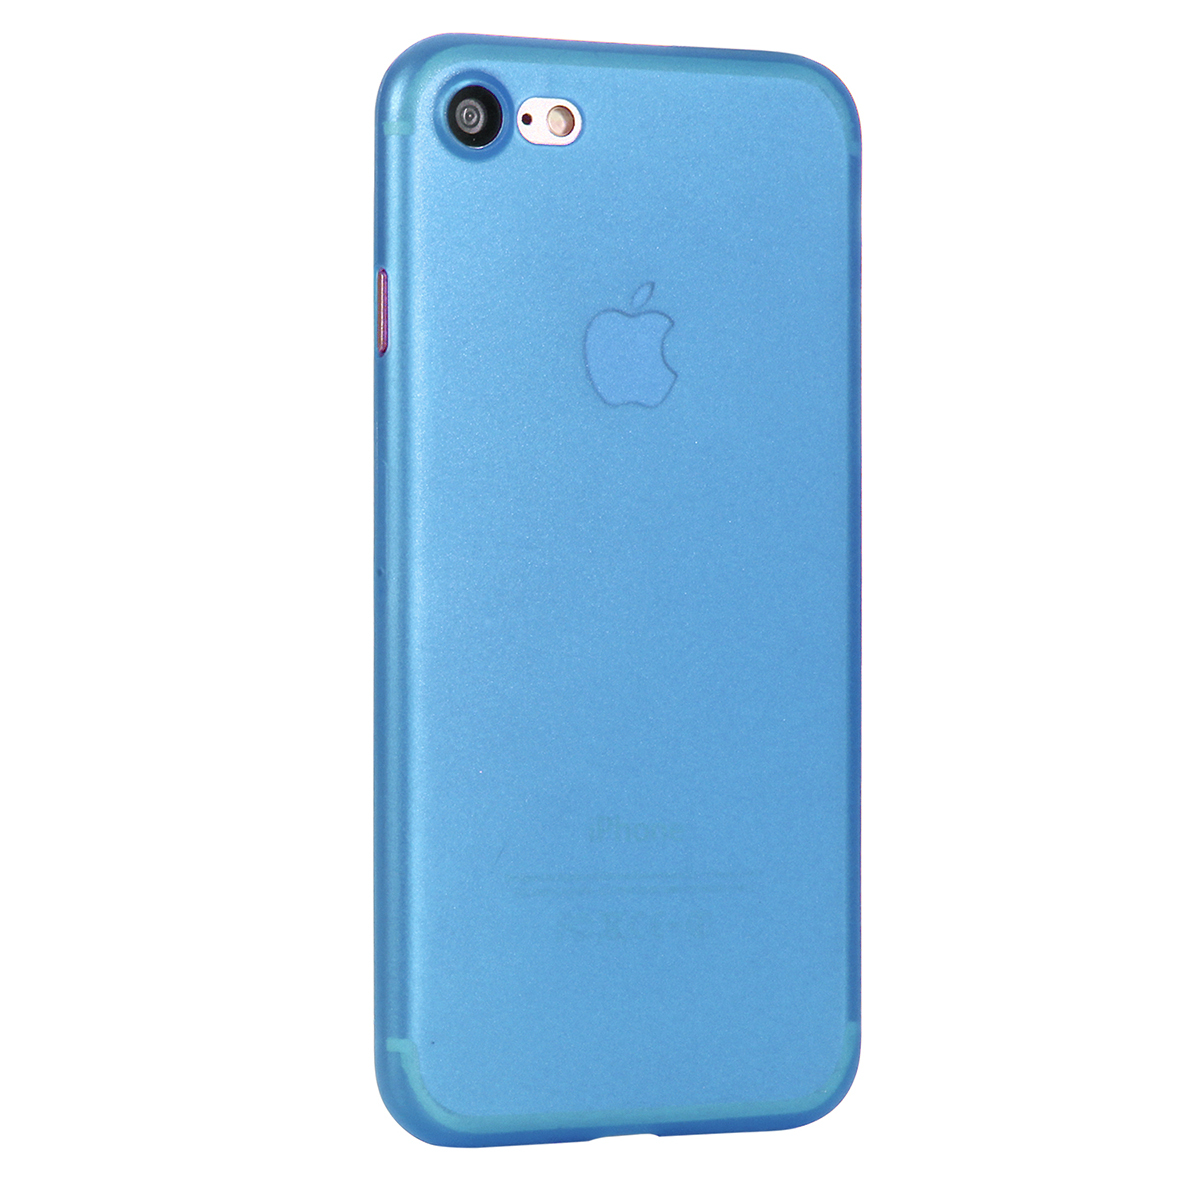 Ultra Slim Full Cover Frosted PC Phone Cover Case for iPhone 7/8 - Blue